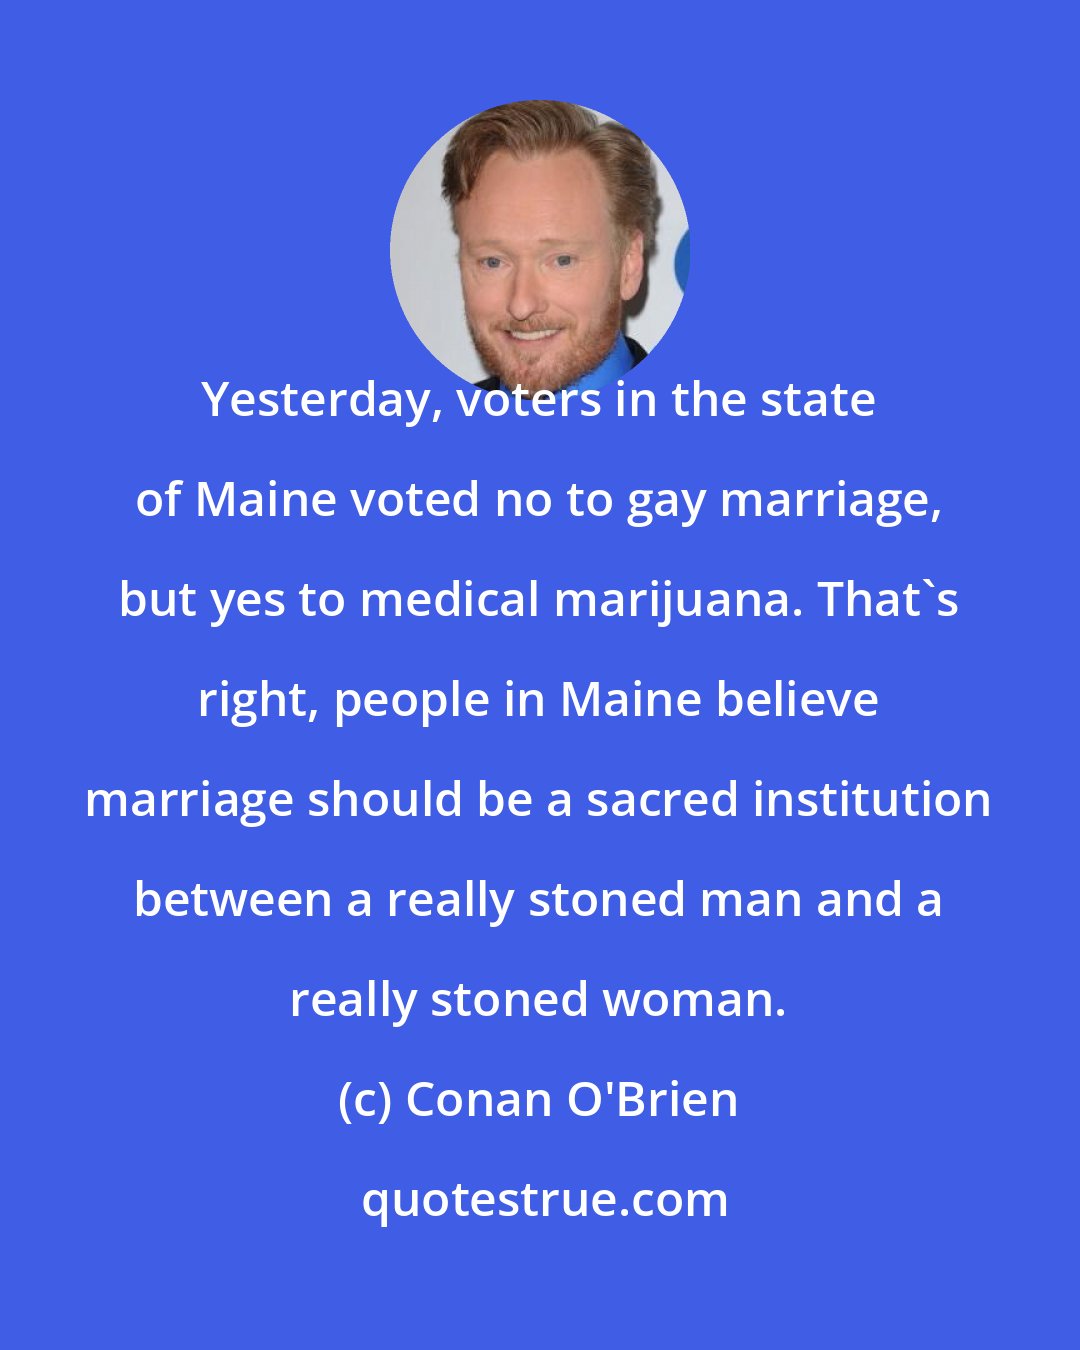 Conan O'Brien: Yesterday, voters in the state of Maine voted no to gay marriage, but yes to medical marijuana. That's right, people in Maine believe marriage should be a sacred institution between a really stoned man and a really stoned woman.